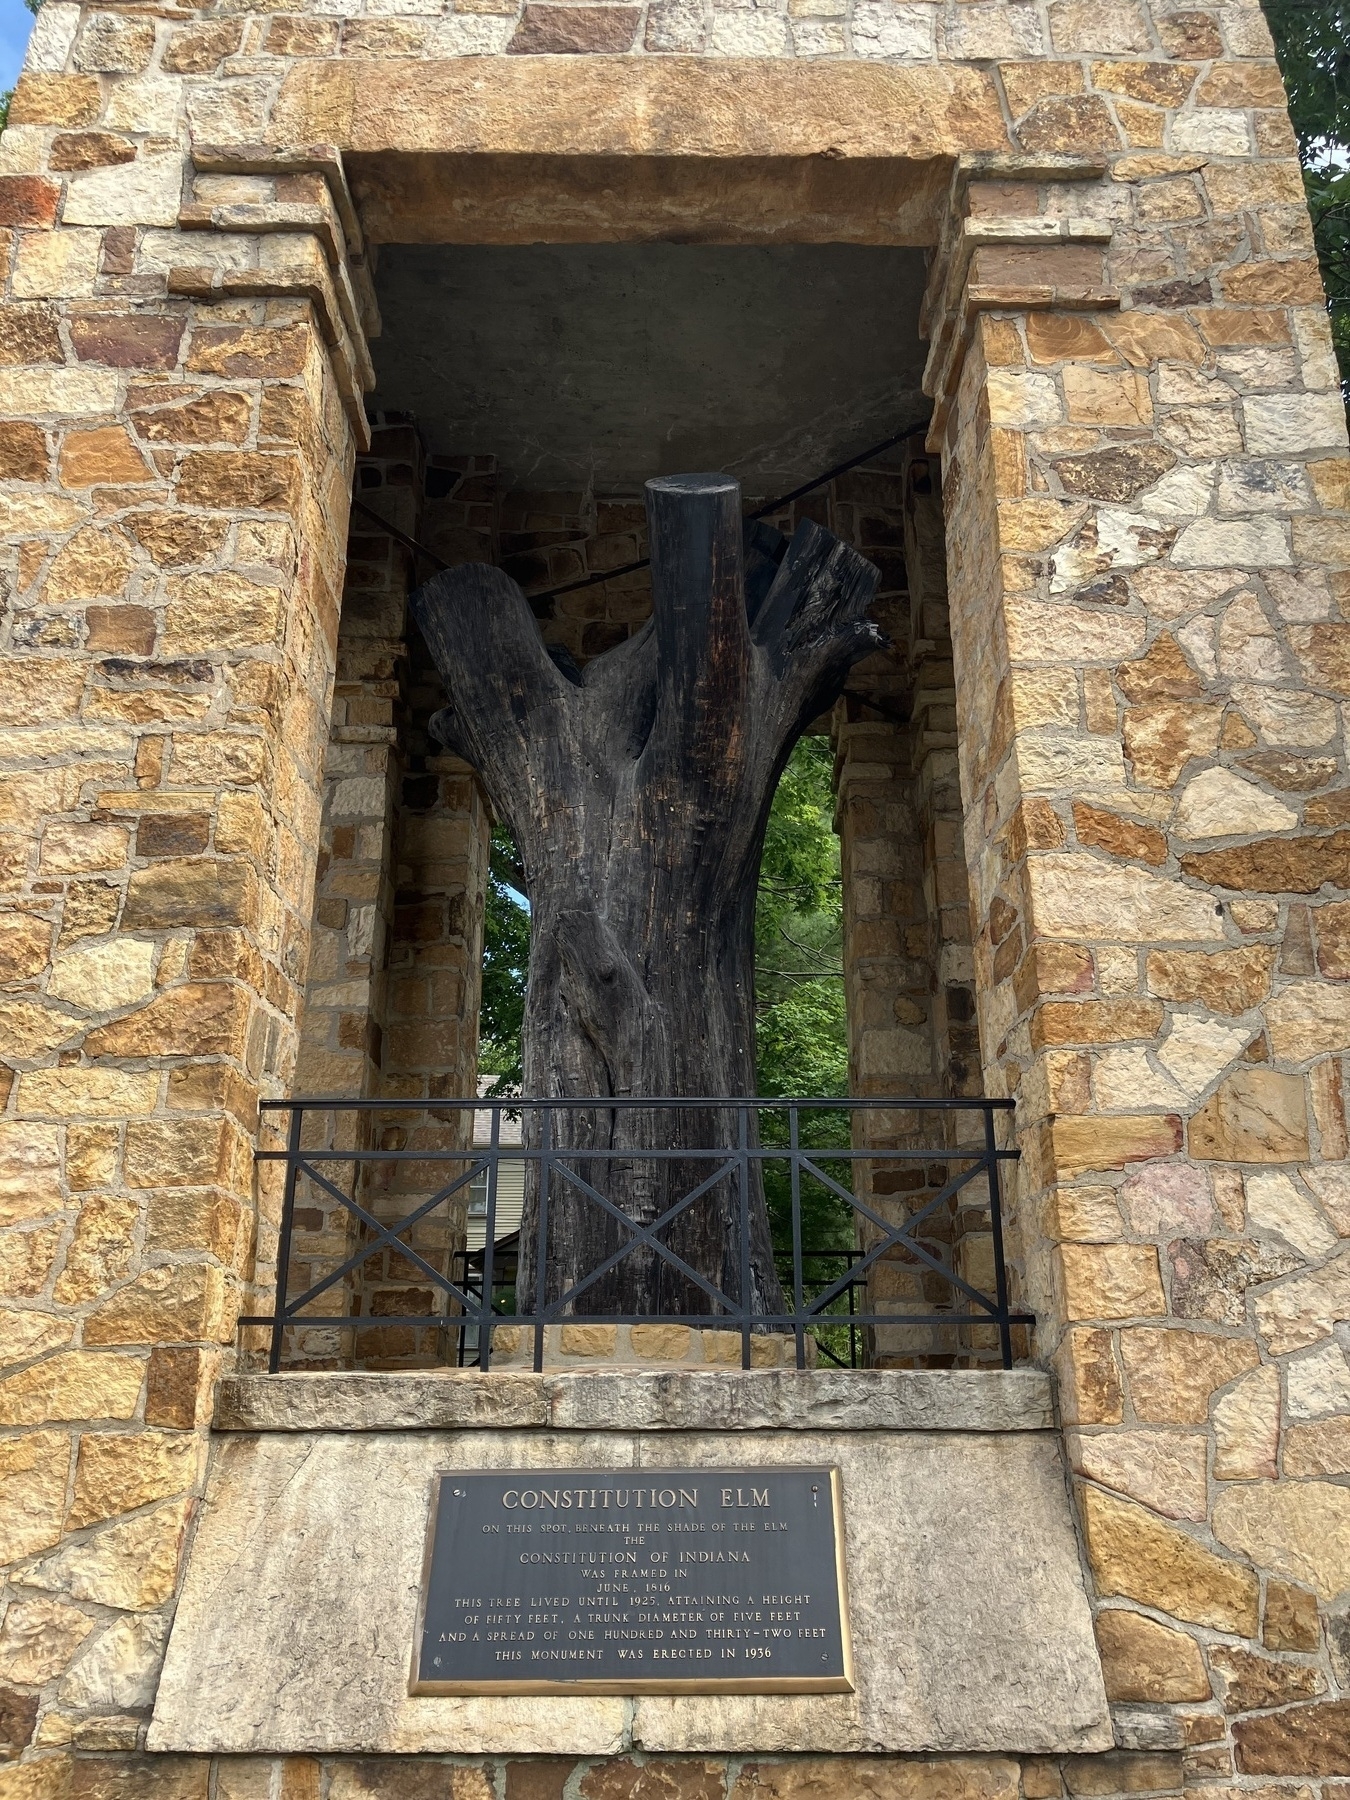 Auto-generated description: A tall wooden stump, encased in a brick and stone structure and accompanied by a commemorative plaque, stands prominently.